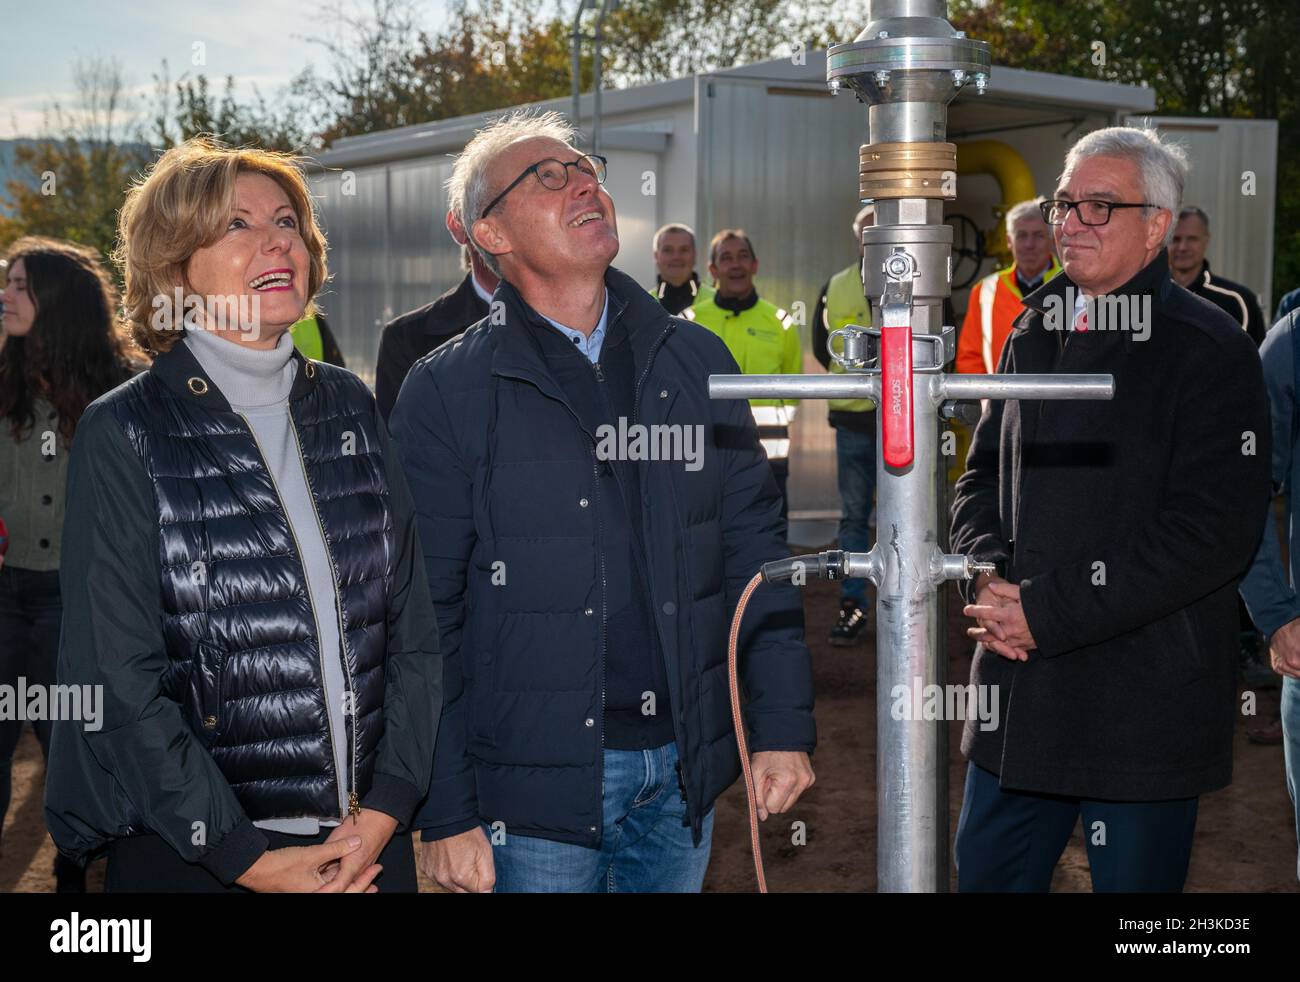 Bad Neuenahr Ahrweiler, Germany. 29th Oct, 2021. Malu Dreyer, Minister President of Rhineland-Palatinate (l-r, SPD), Jörg Rönz (Chairman of the Board of Energienetze Mittelrhein) and Roger Lewentz (SPD, Minister of the Interior of Rhineland-Palatinate) after the commissioning of the new high-pressure gas pipeline for heat supply. The flash flood in the Ahr valley in July had also destroyed large parts of the natural gas network. The new high-pressure pipeline was installed in record time. Credit: Harald Tittel/dpa/Alamy Live News Stock Photo